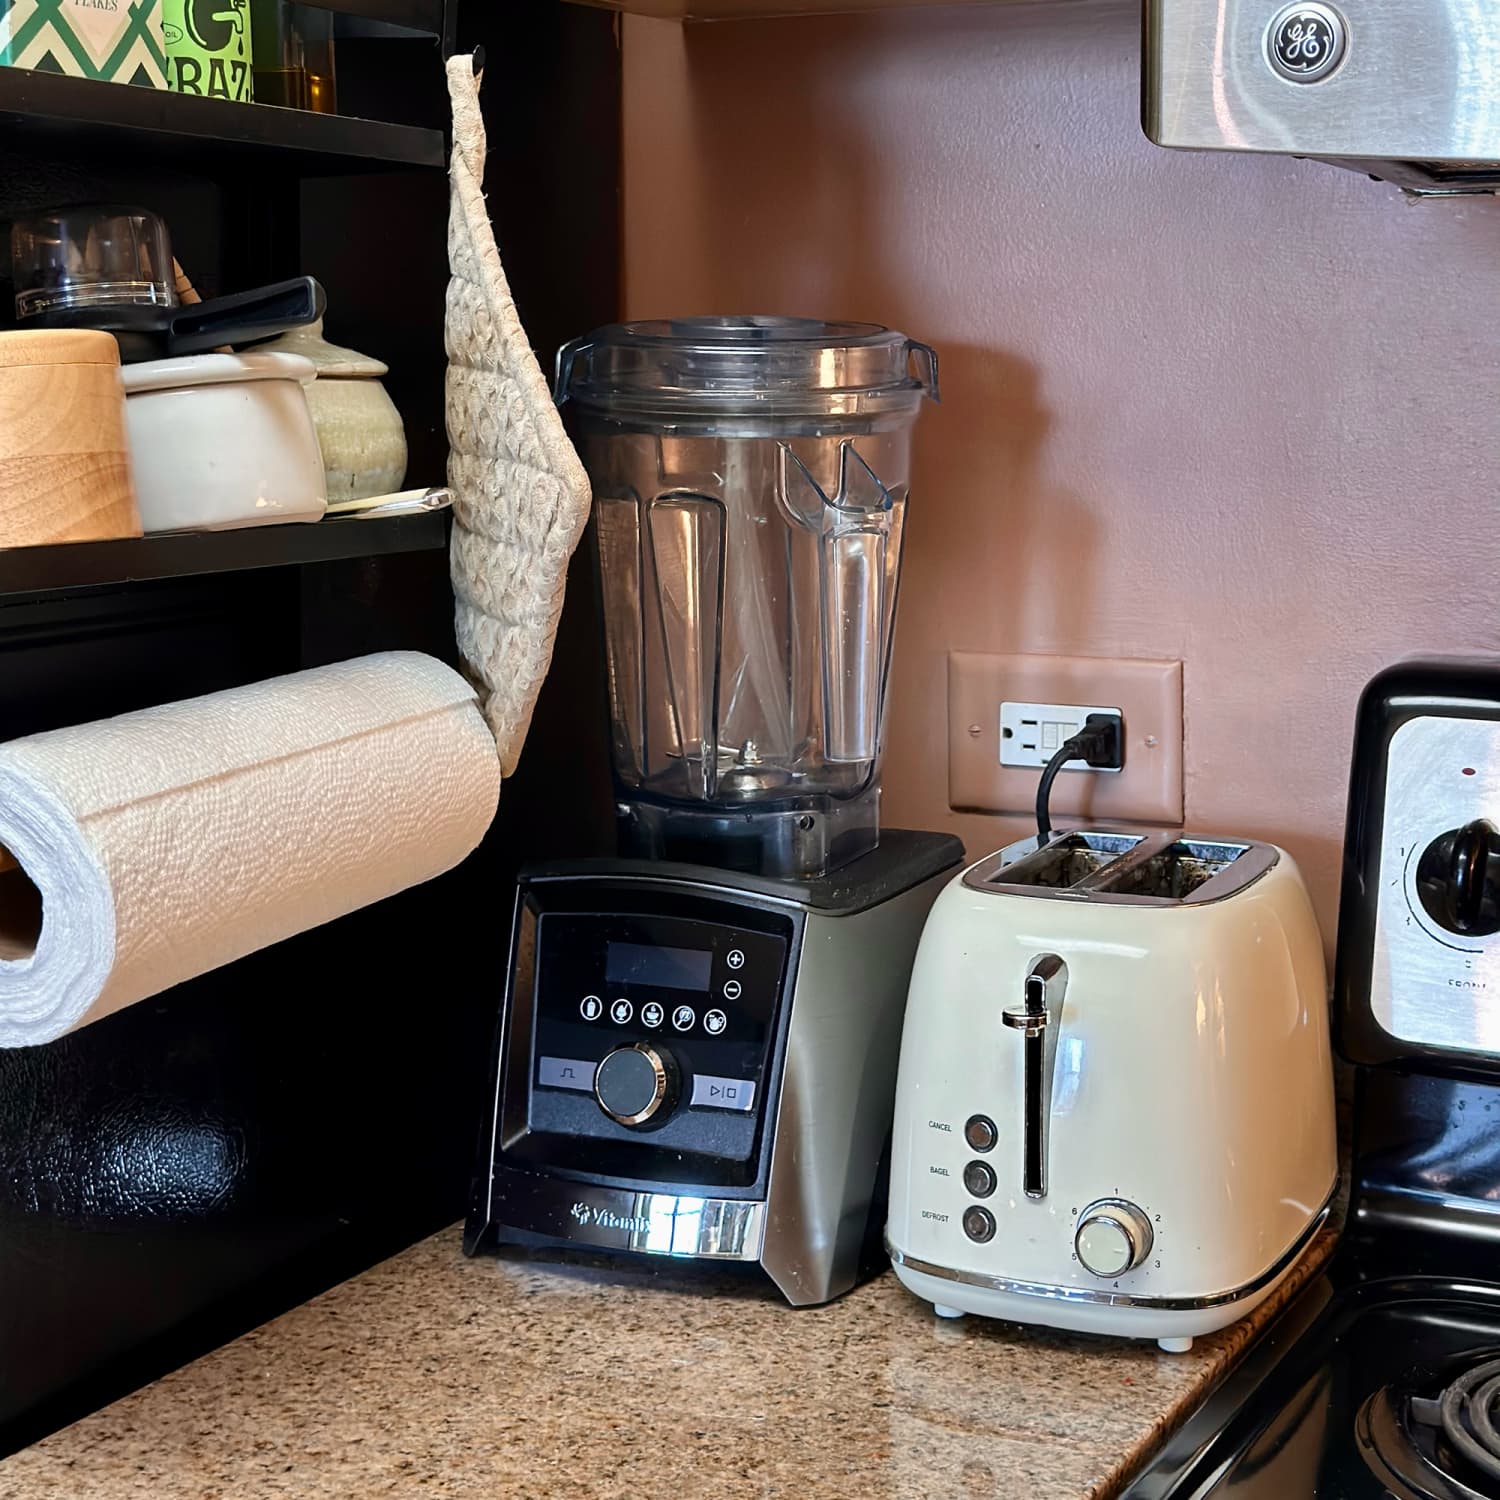 These $10 Countertop Appliance Sliders From  Are a Must-Have